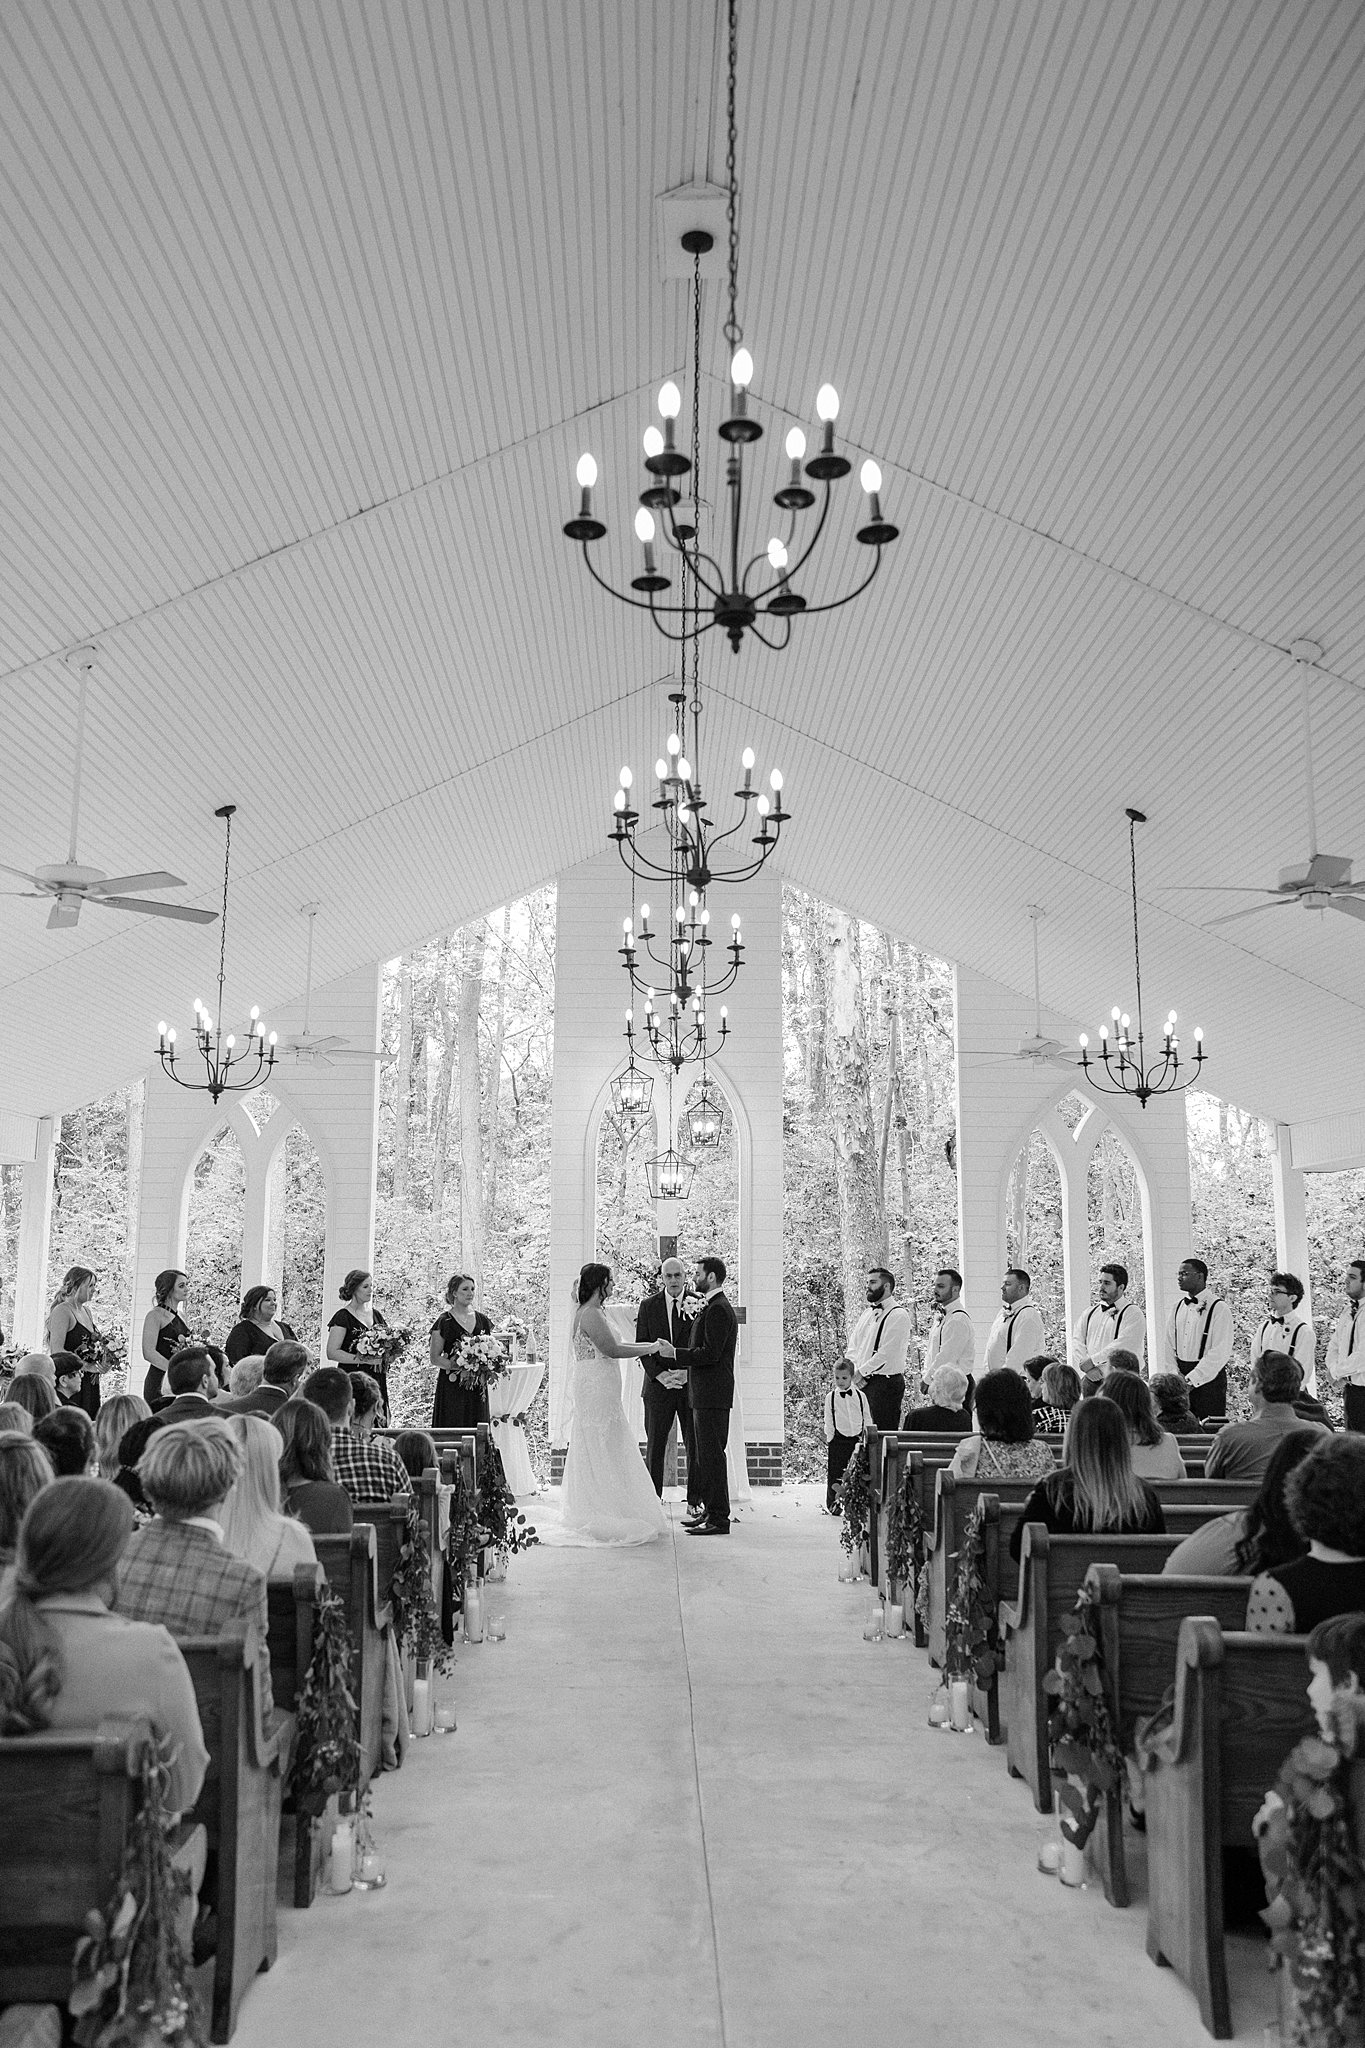 A black and white view of a wedding ceremony in an open air chapel